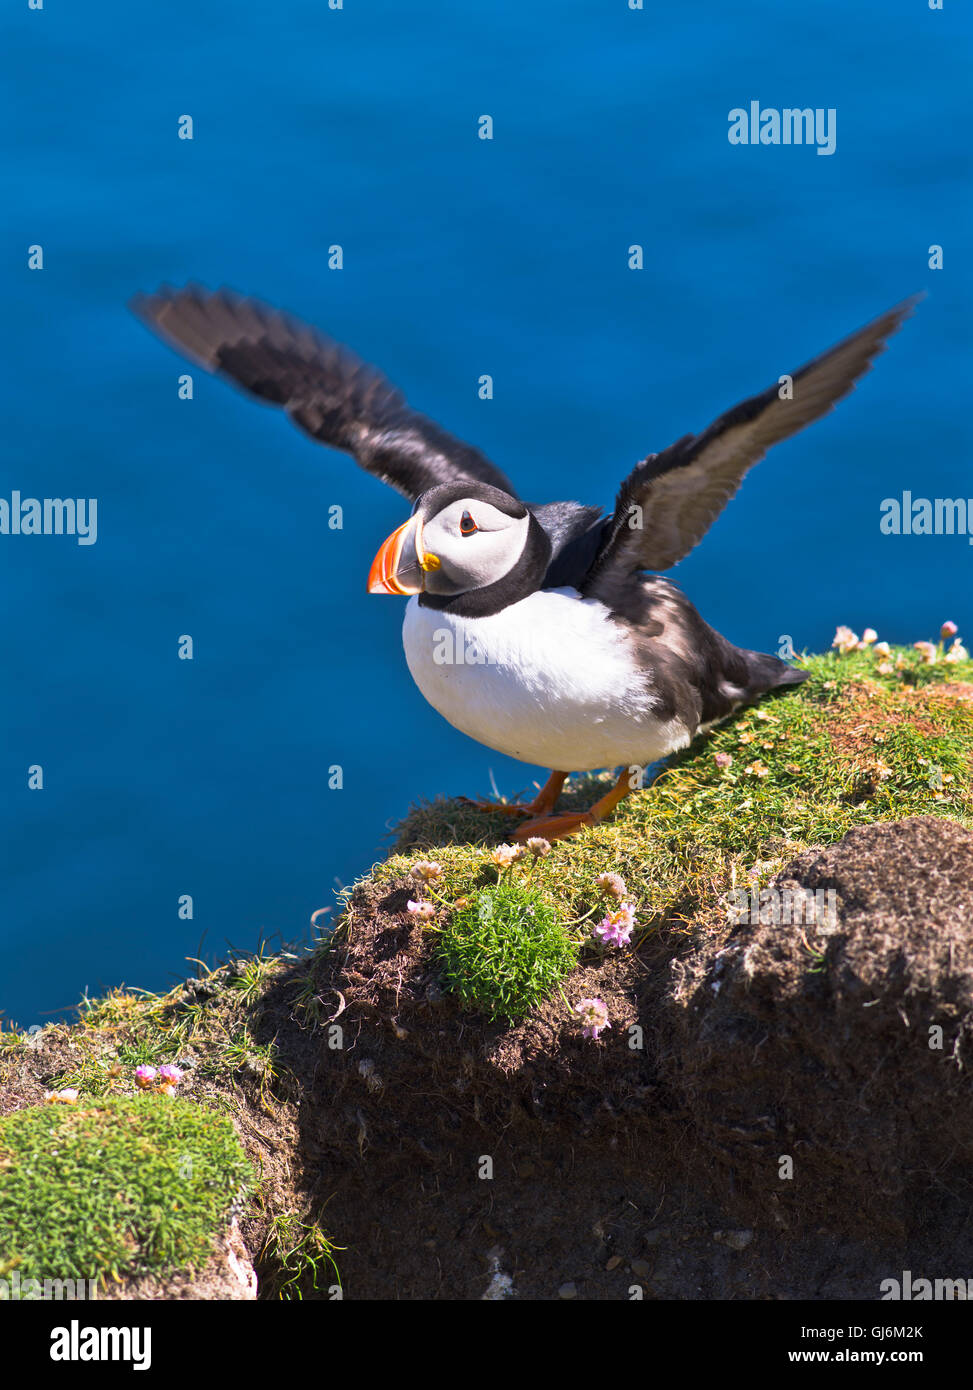 dh Bu Ness FAIR ISLE SHETLAND Fratercula arctica Puffin flapping wing top ready to take off scotland isles bird island parrot puffins Stock Photo